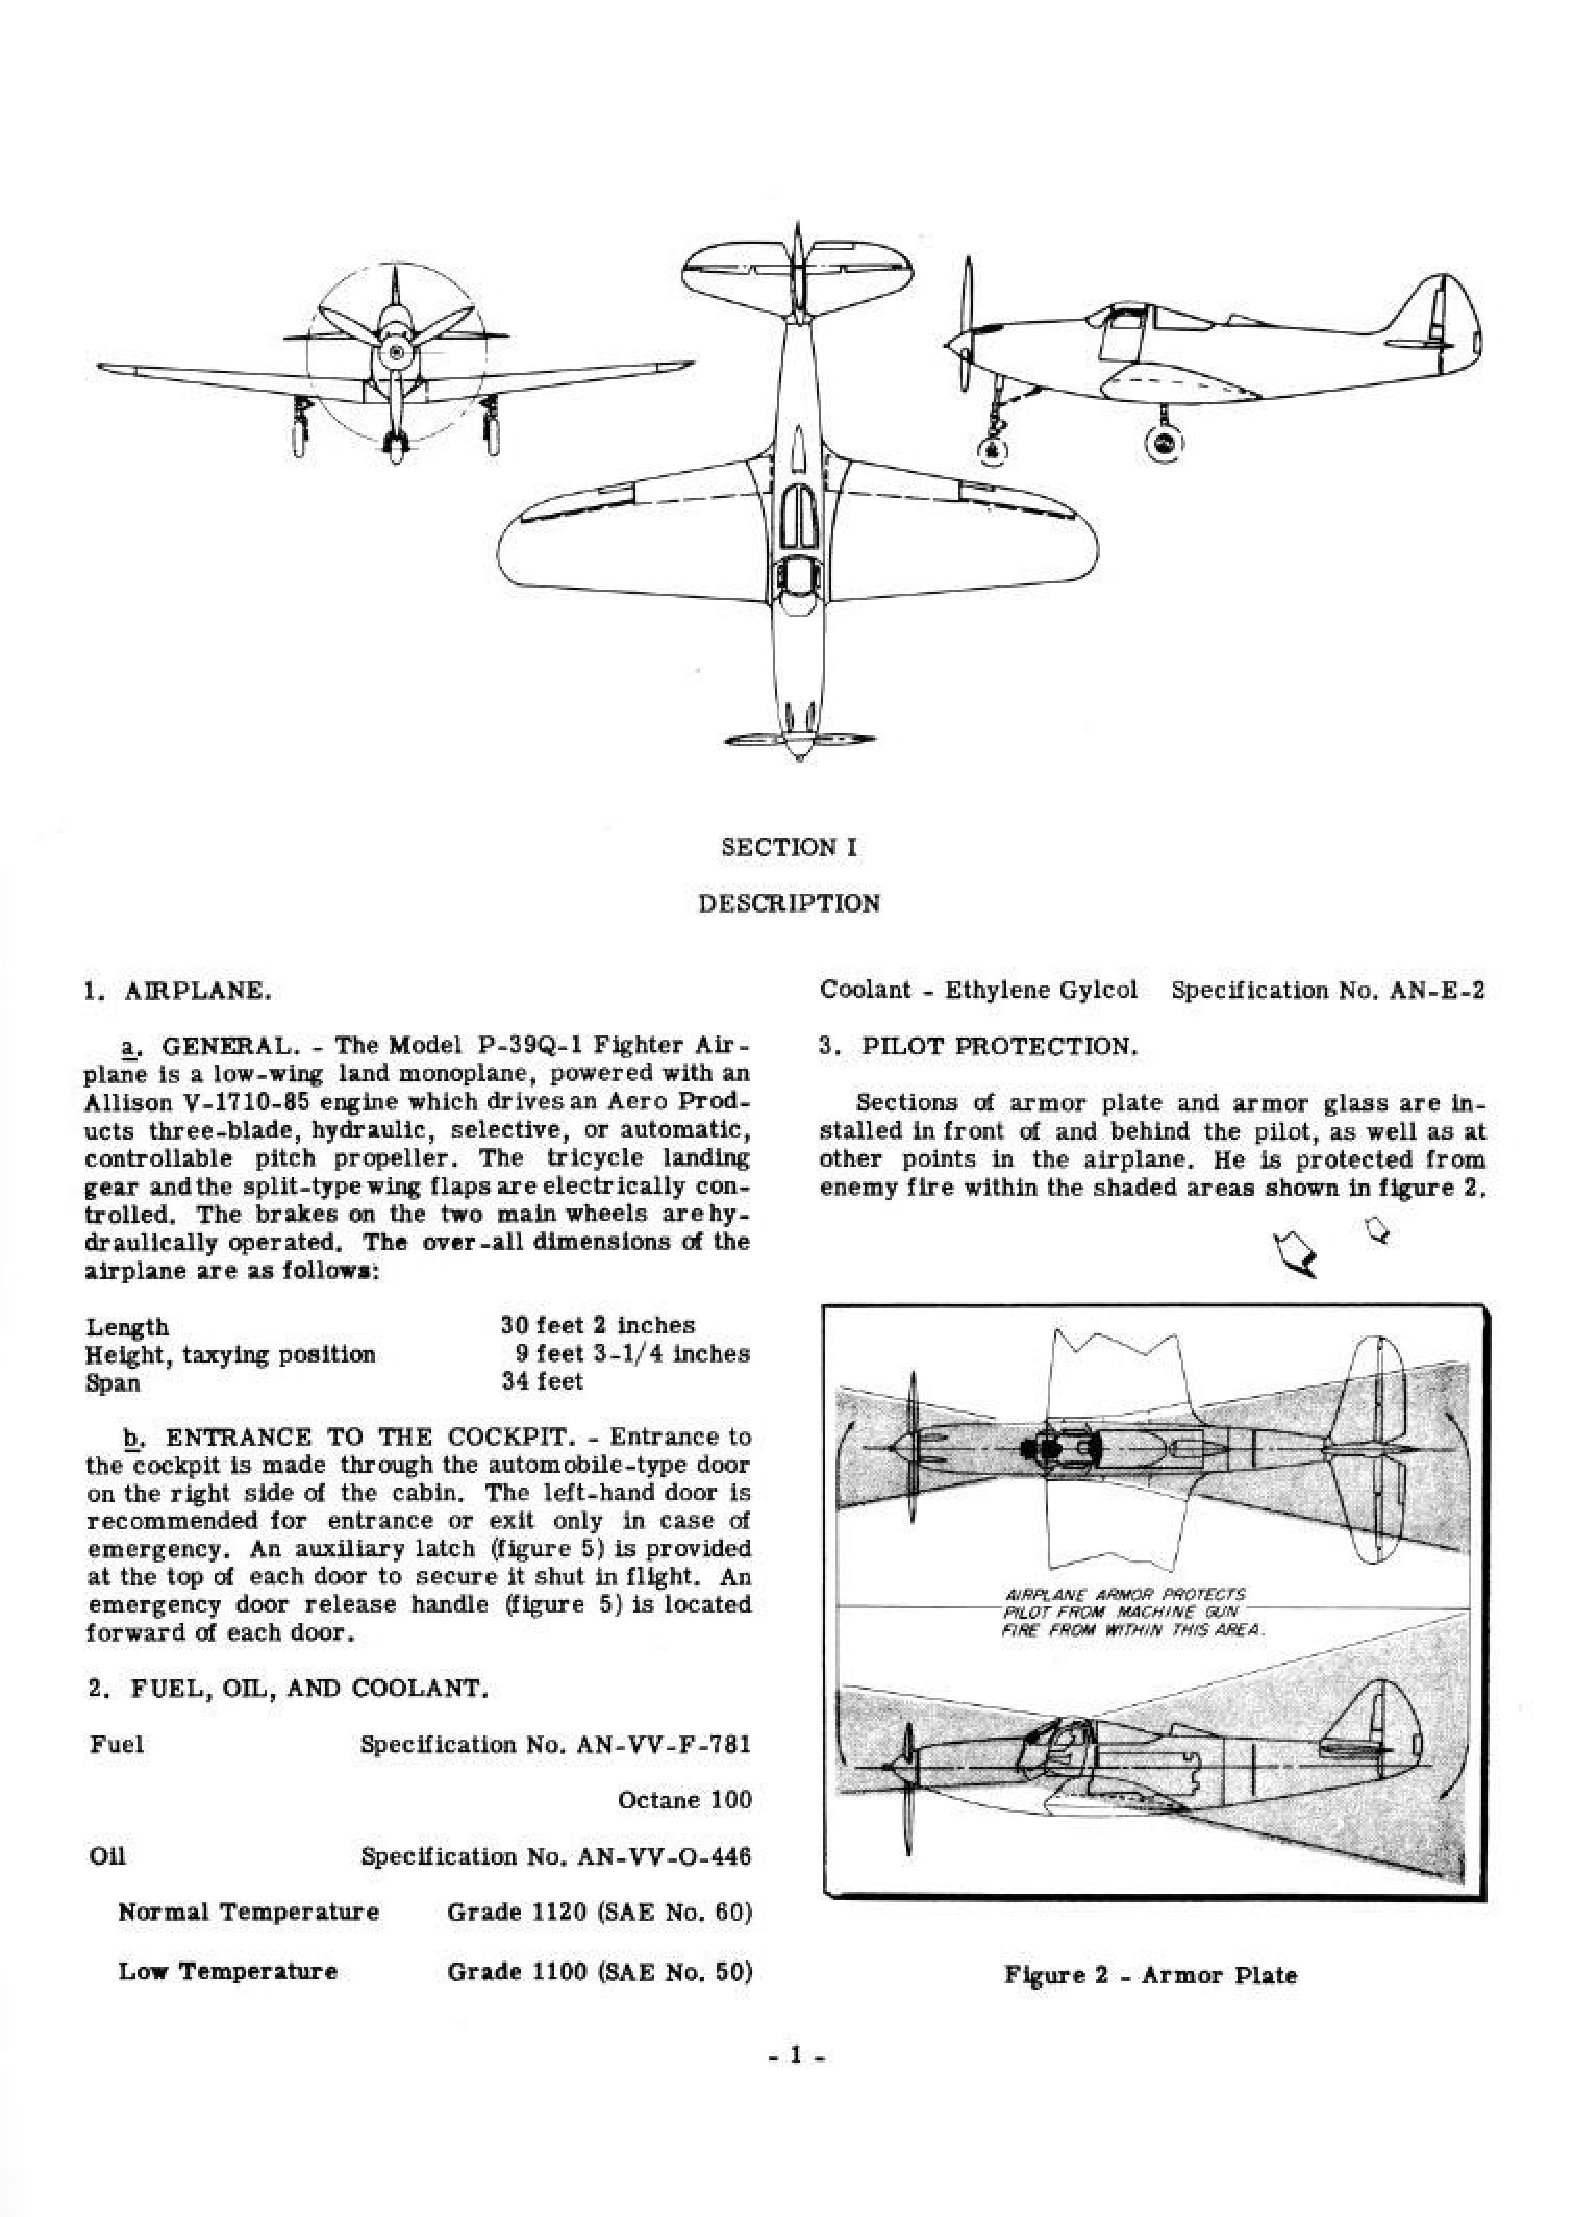 Sample page 6 from AirCorps Library document: Pilot's Flight Operating Instructions for Army Model P-39Q-1